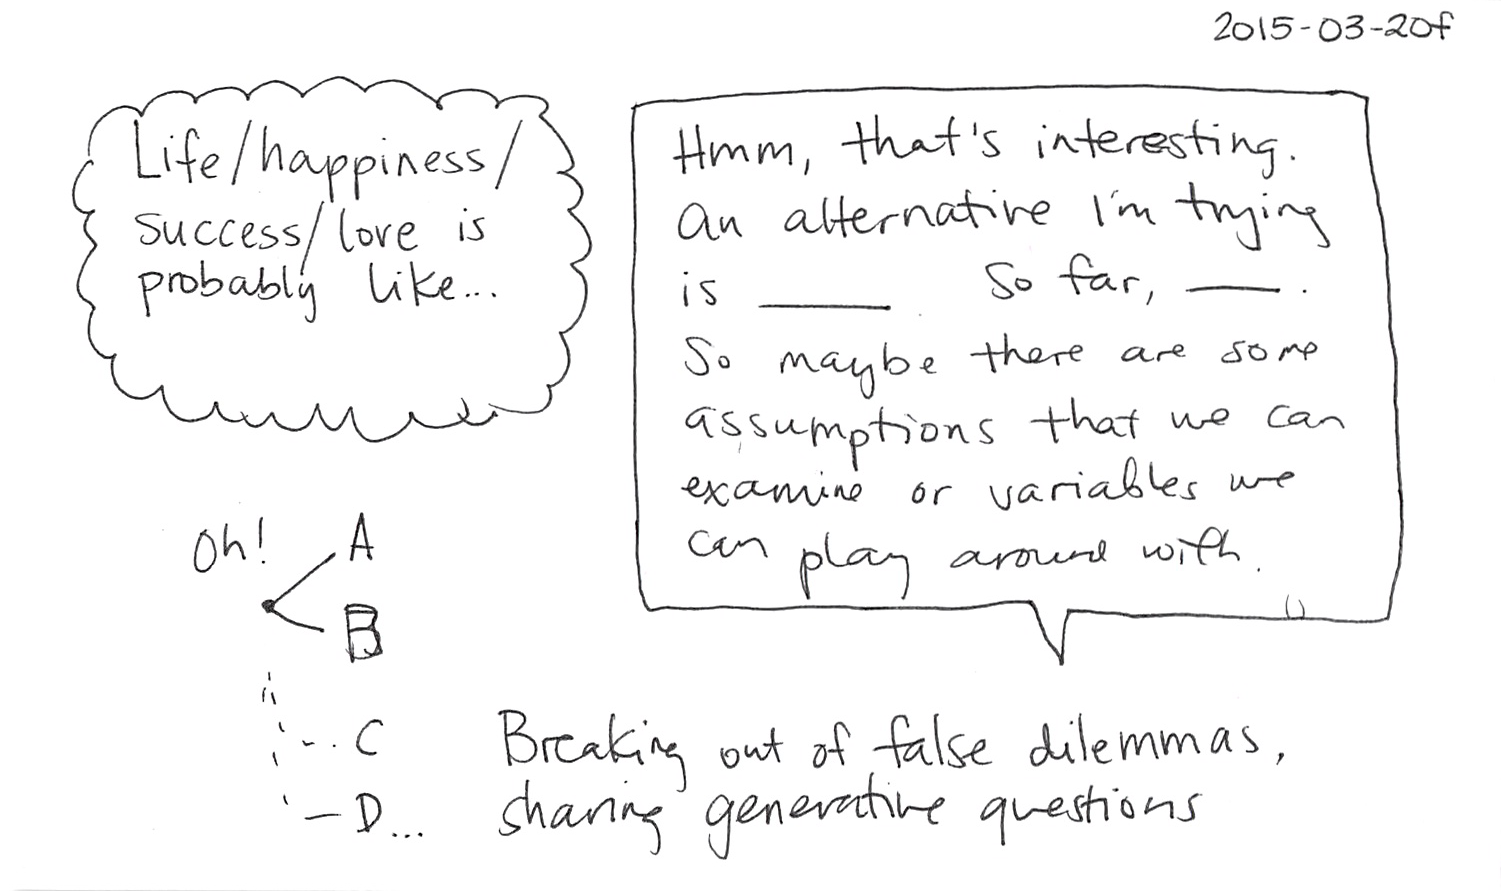 2015-03-20f Sharing alternatives -- index card #support.png